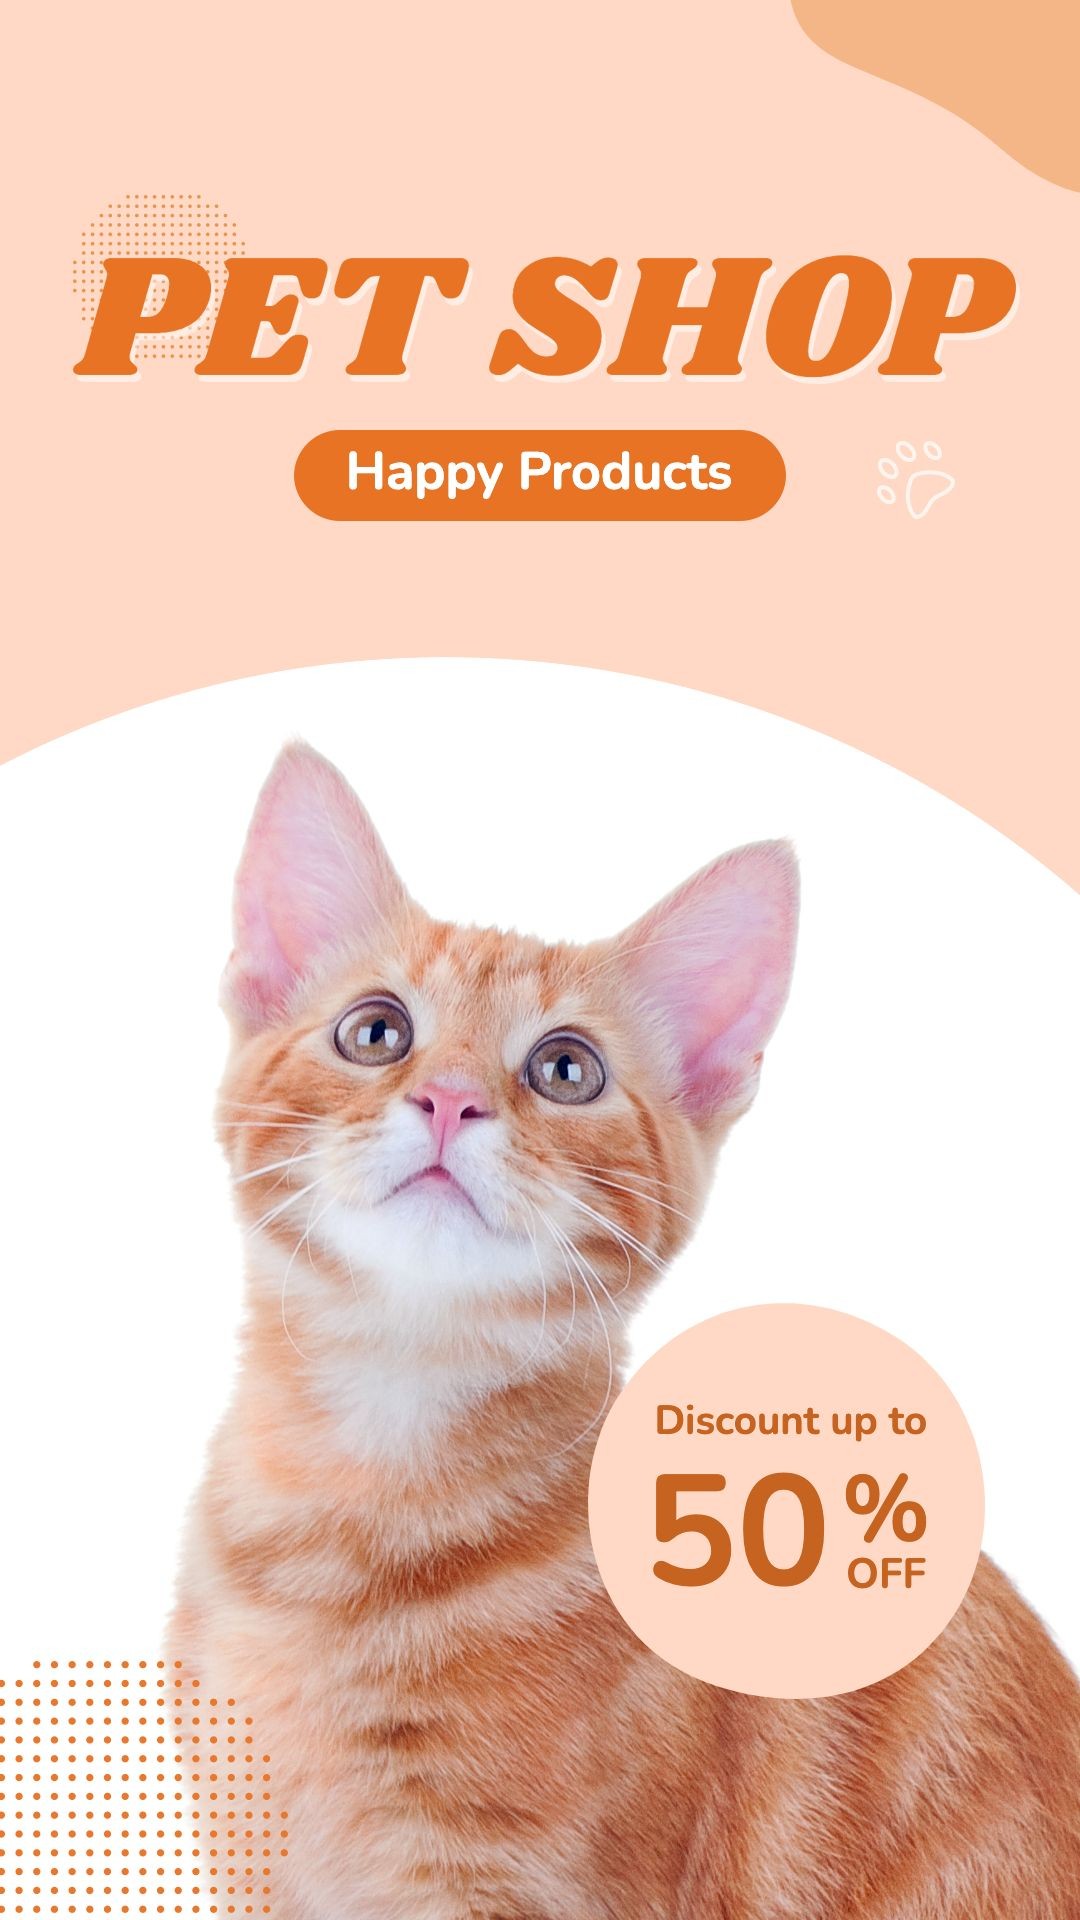 Number Element Cute Style Pet Product Supplies Sale Promo Ecommerce Story